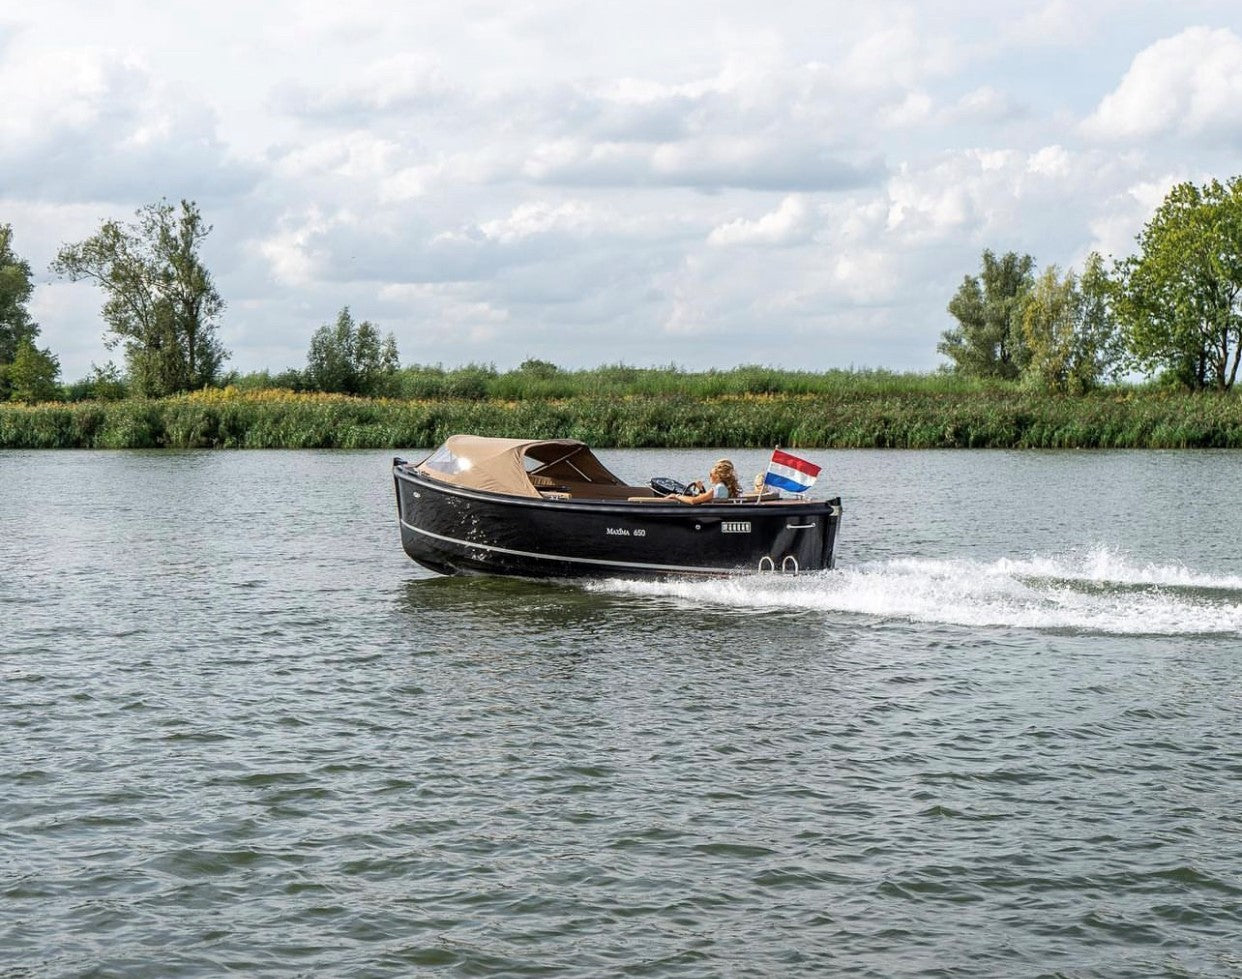 Maxima 650 Flying Lounge Powered by Honda BF50 LRTU 50hp In Stock Now